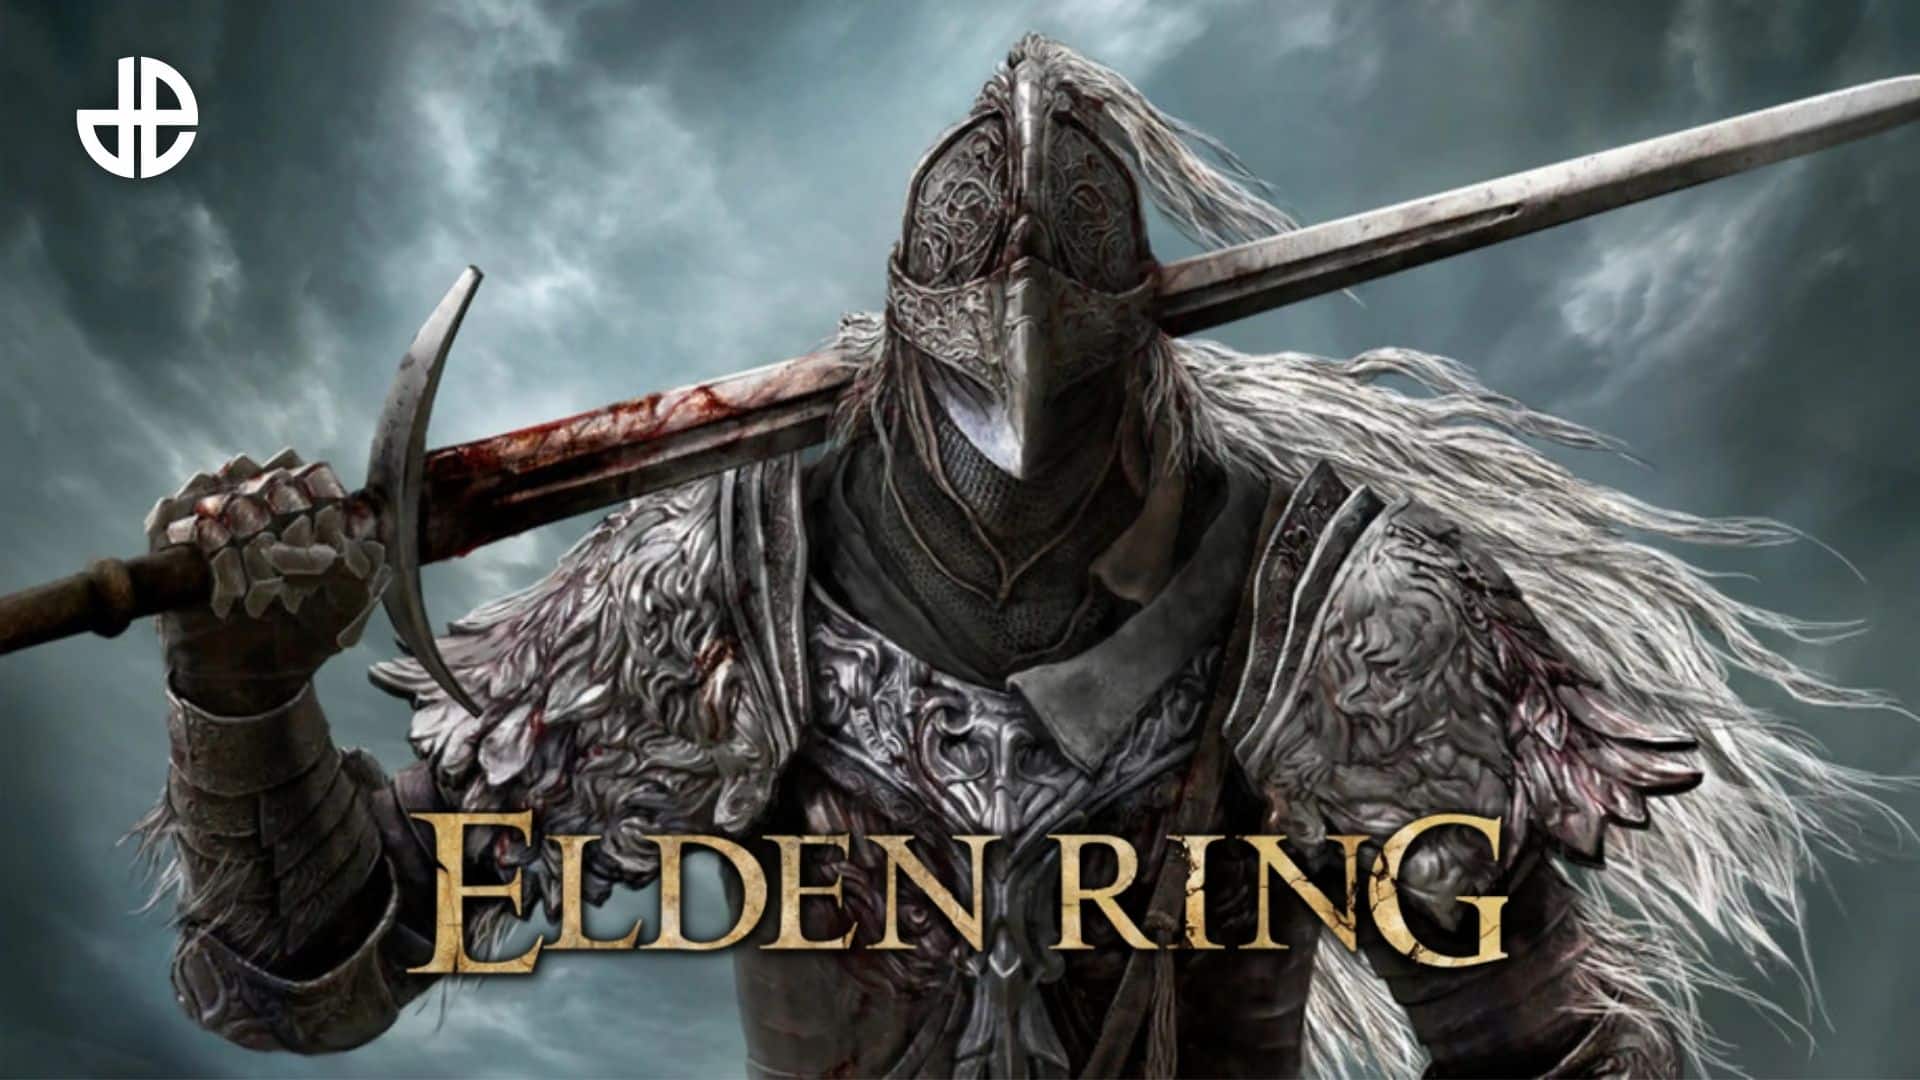 Elden Ring Guides - Weapons, Armor, Items, Materials, and Builds